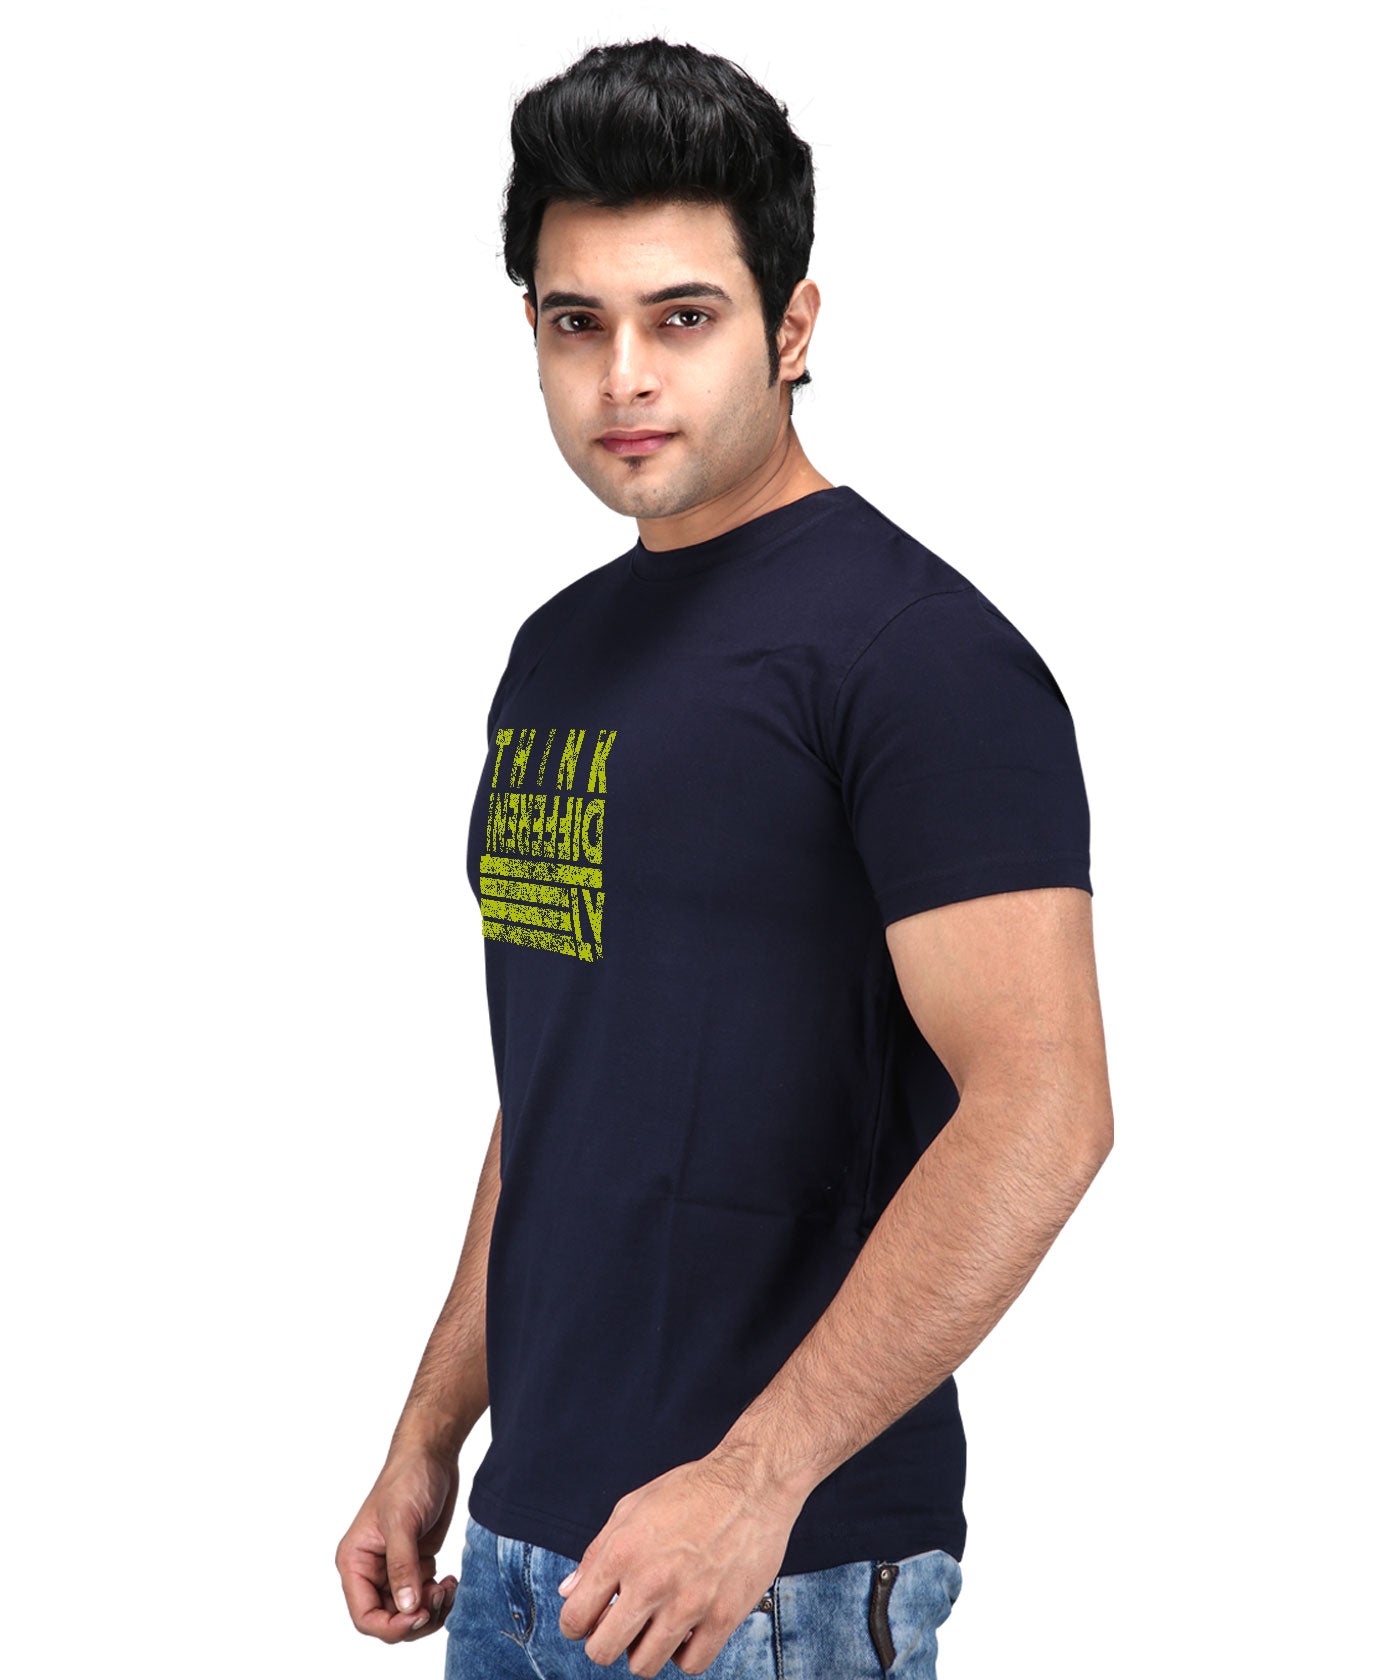 Think Differently - Premium Round Neck Cotton Tees for Men - Navy Blue